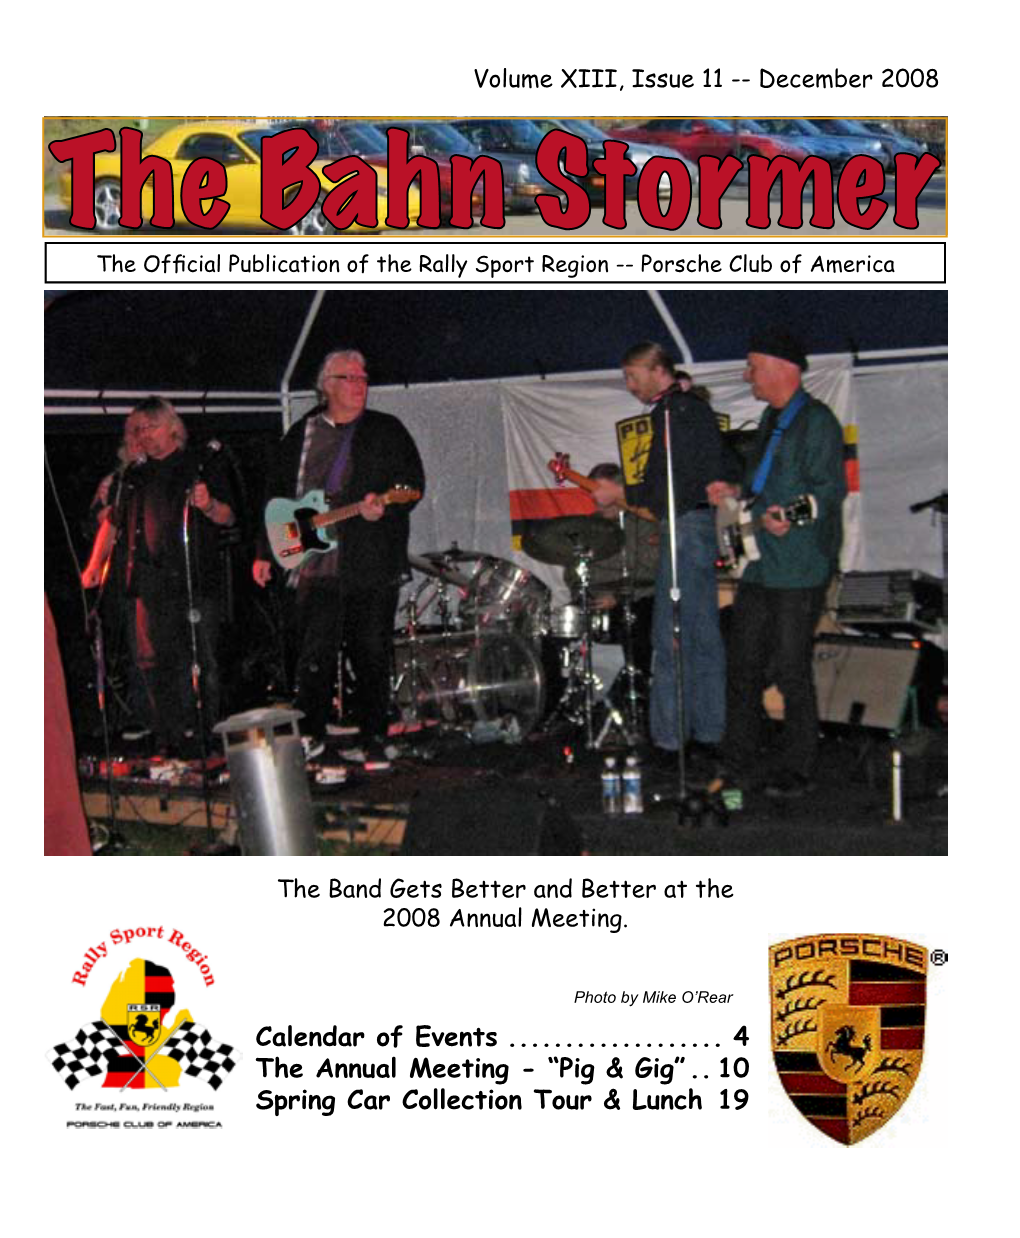 The Bahn Stormer the Official Publication of the Rally Sport Region -- Porsche Club of America